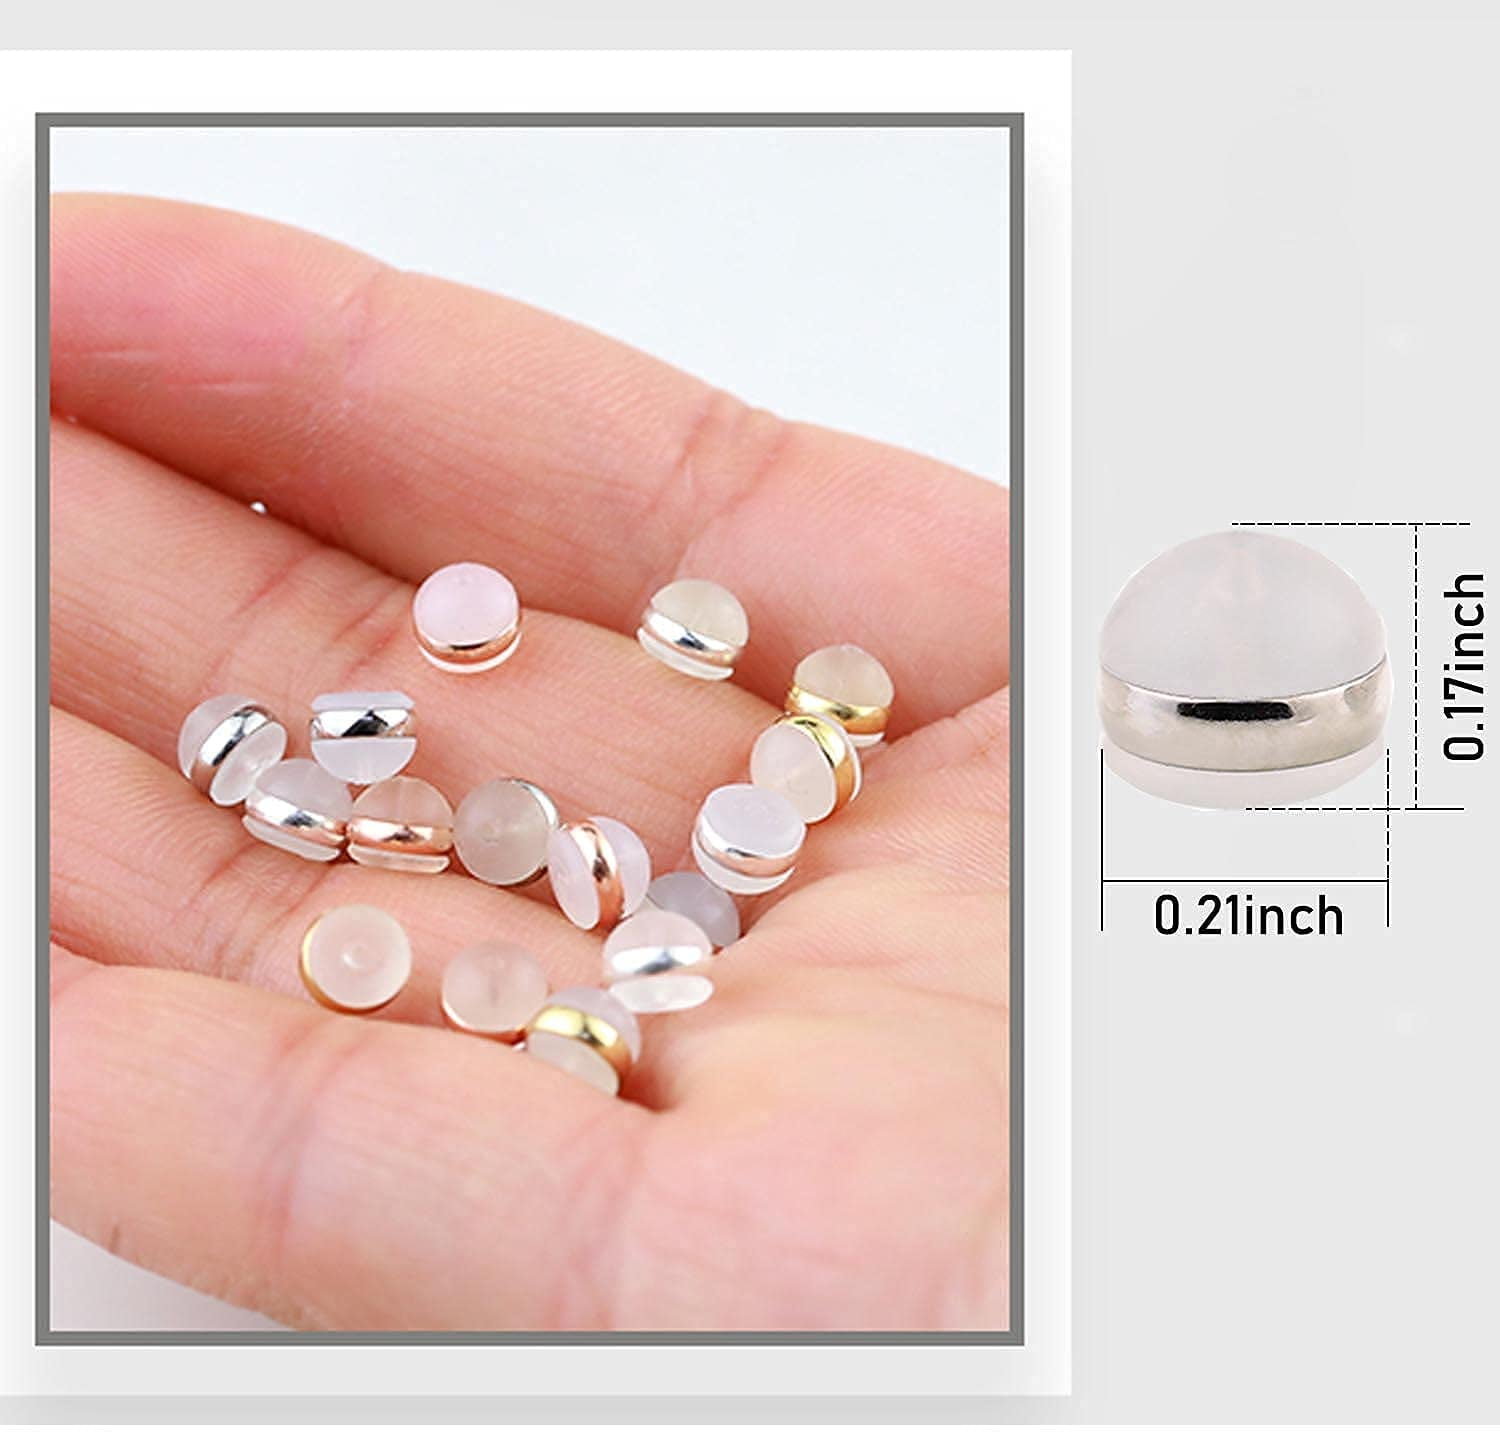 Earring Backs Rubber Soft Clear Earing Backings Replacement Secure Silicone  for Pierced Earings Back for Fish Hook Hypoallergenic Plastic Earrings  Stopper for Wire Earrings 200pcs  Walmartcom